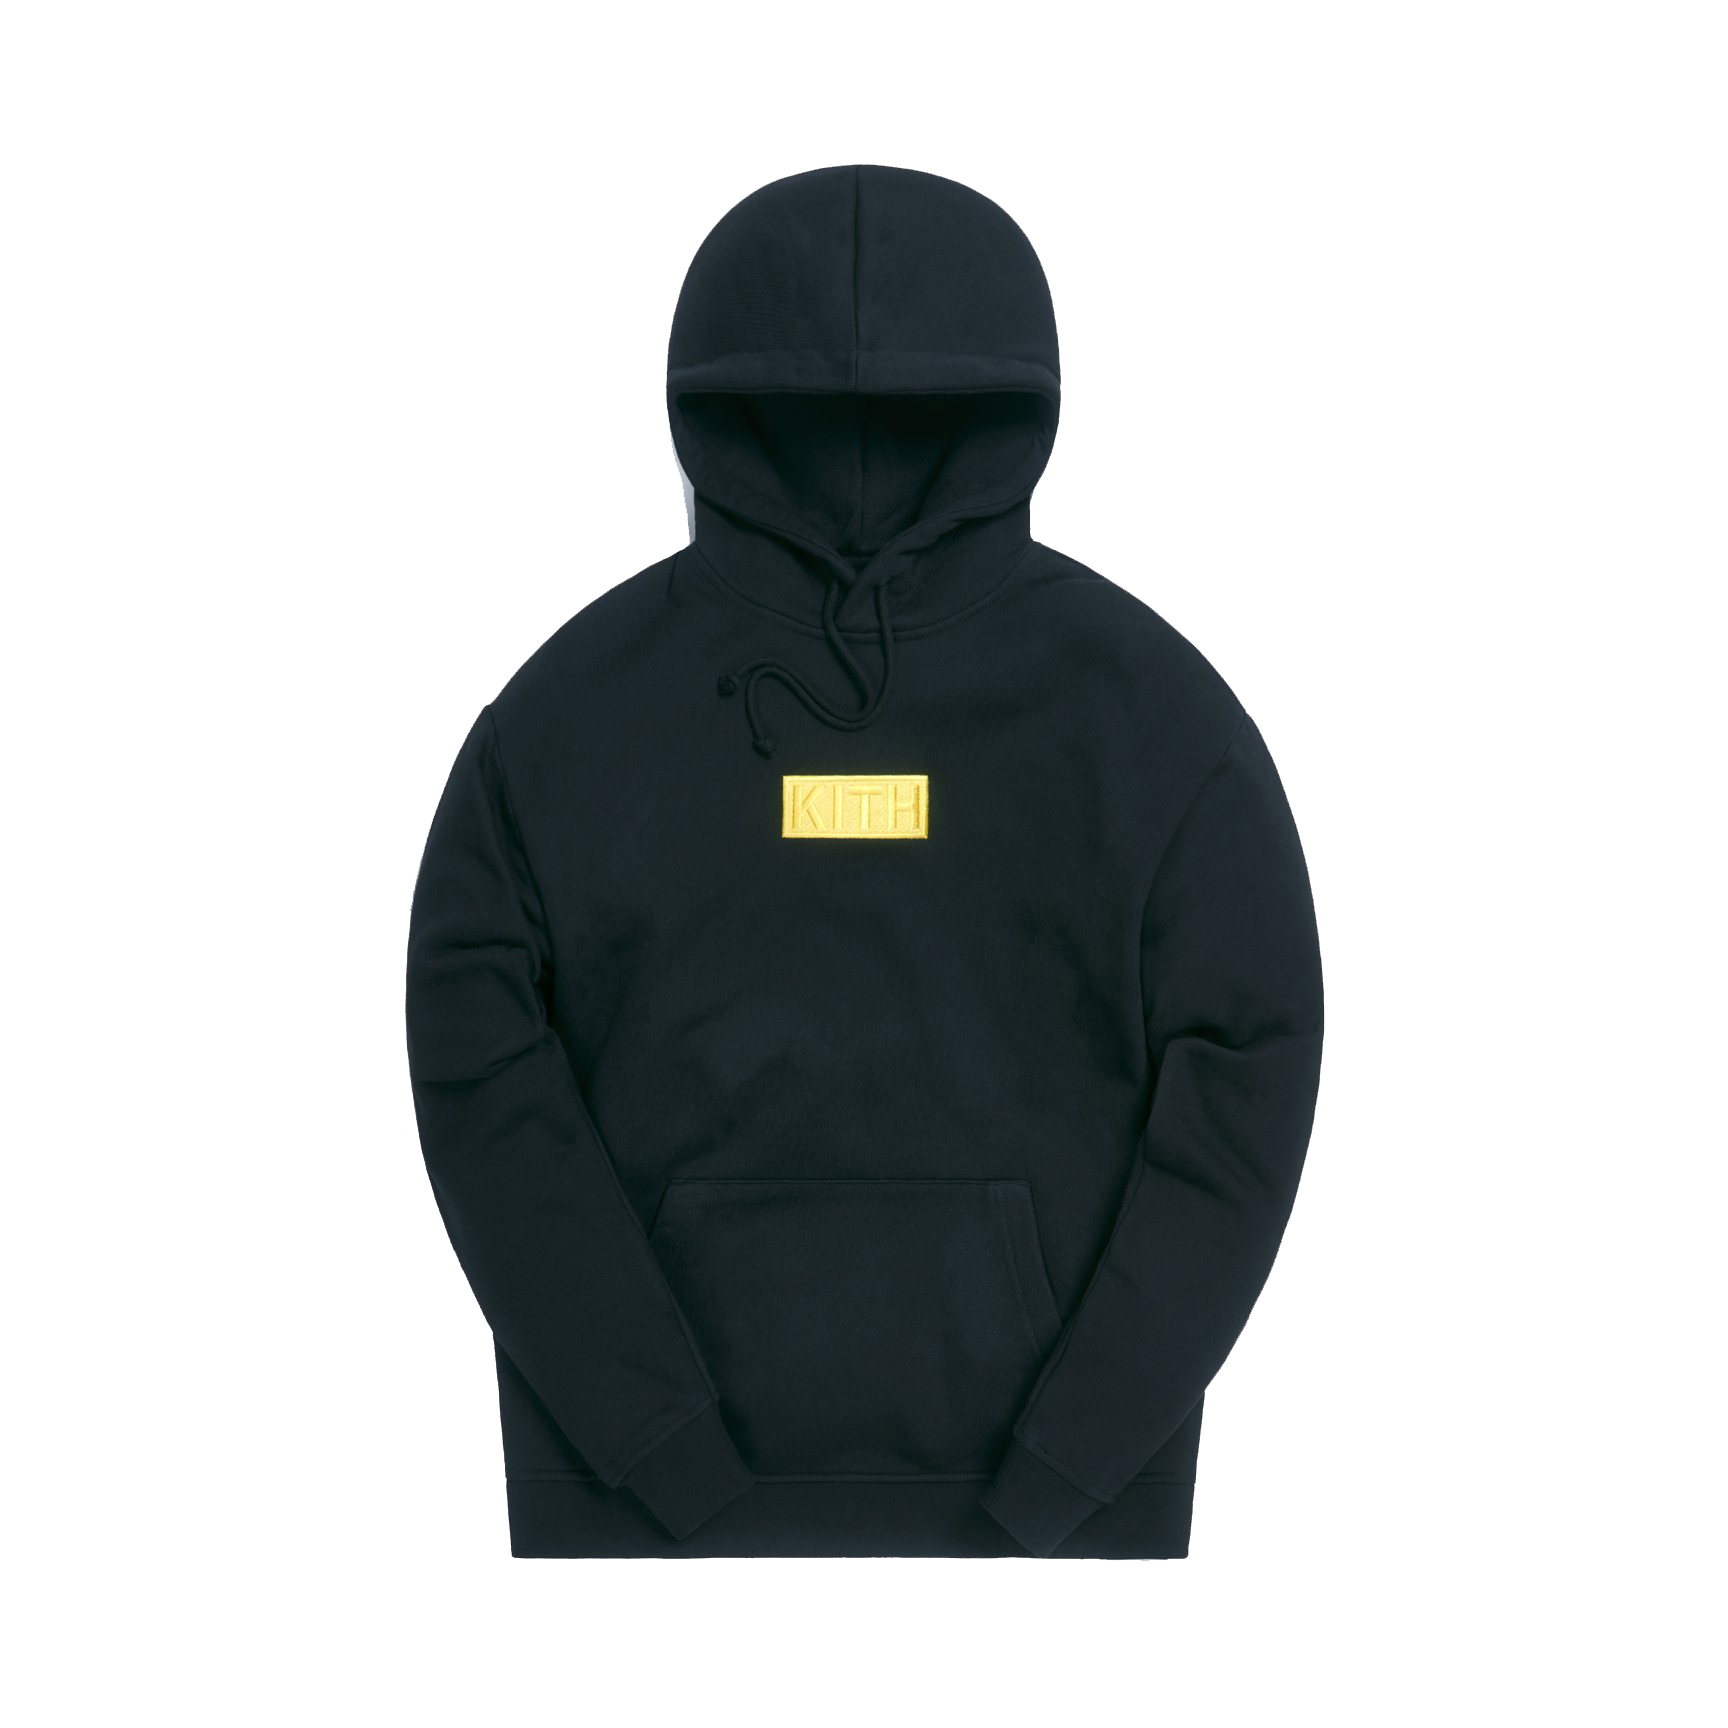 Kith x The Simpsons Sports Family Hoodie Black